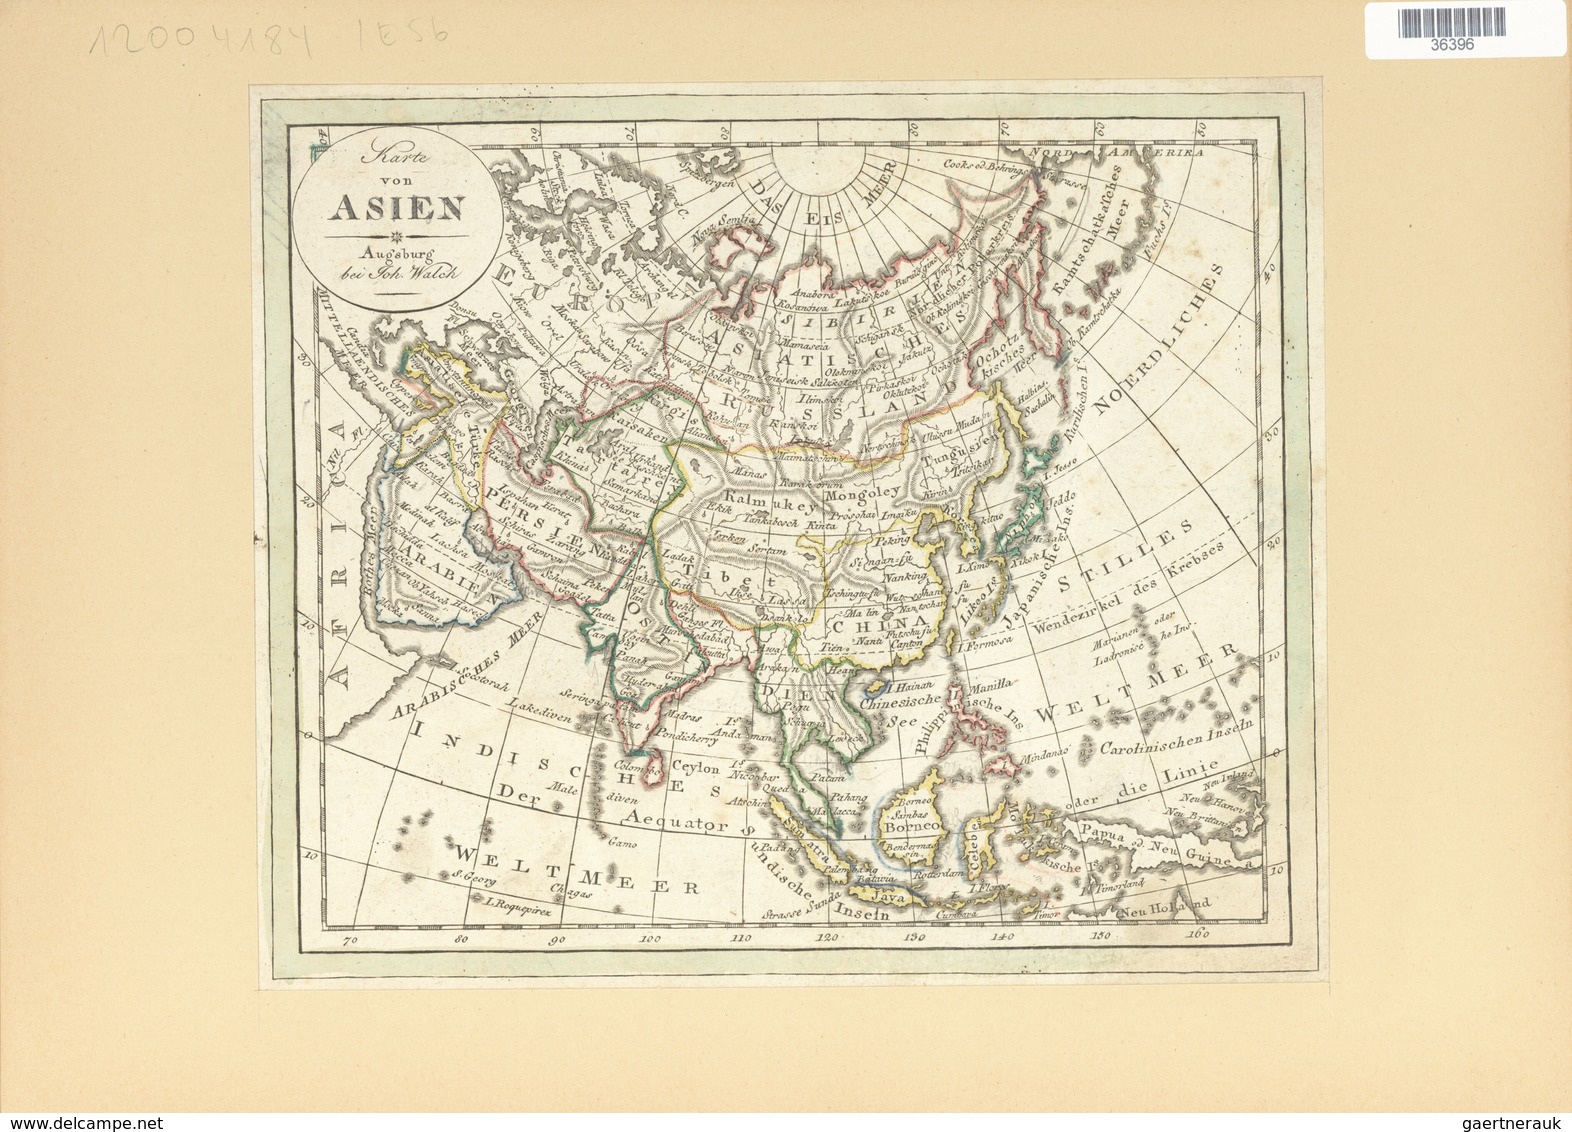 Landkarten Und Stiche: 1797. Map Of Asia From Russia To China, Korea, Japan, Indonesia, India, Phili - Geographie